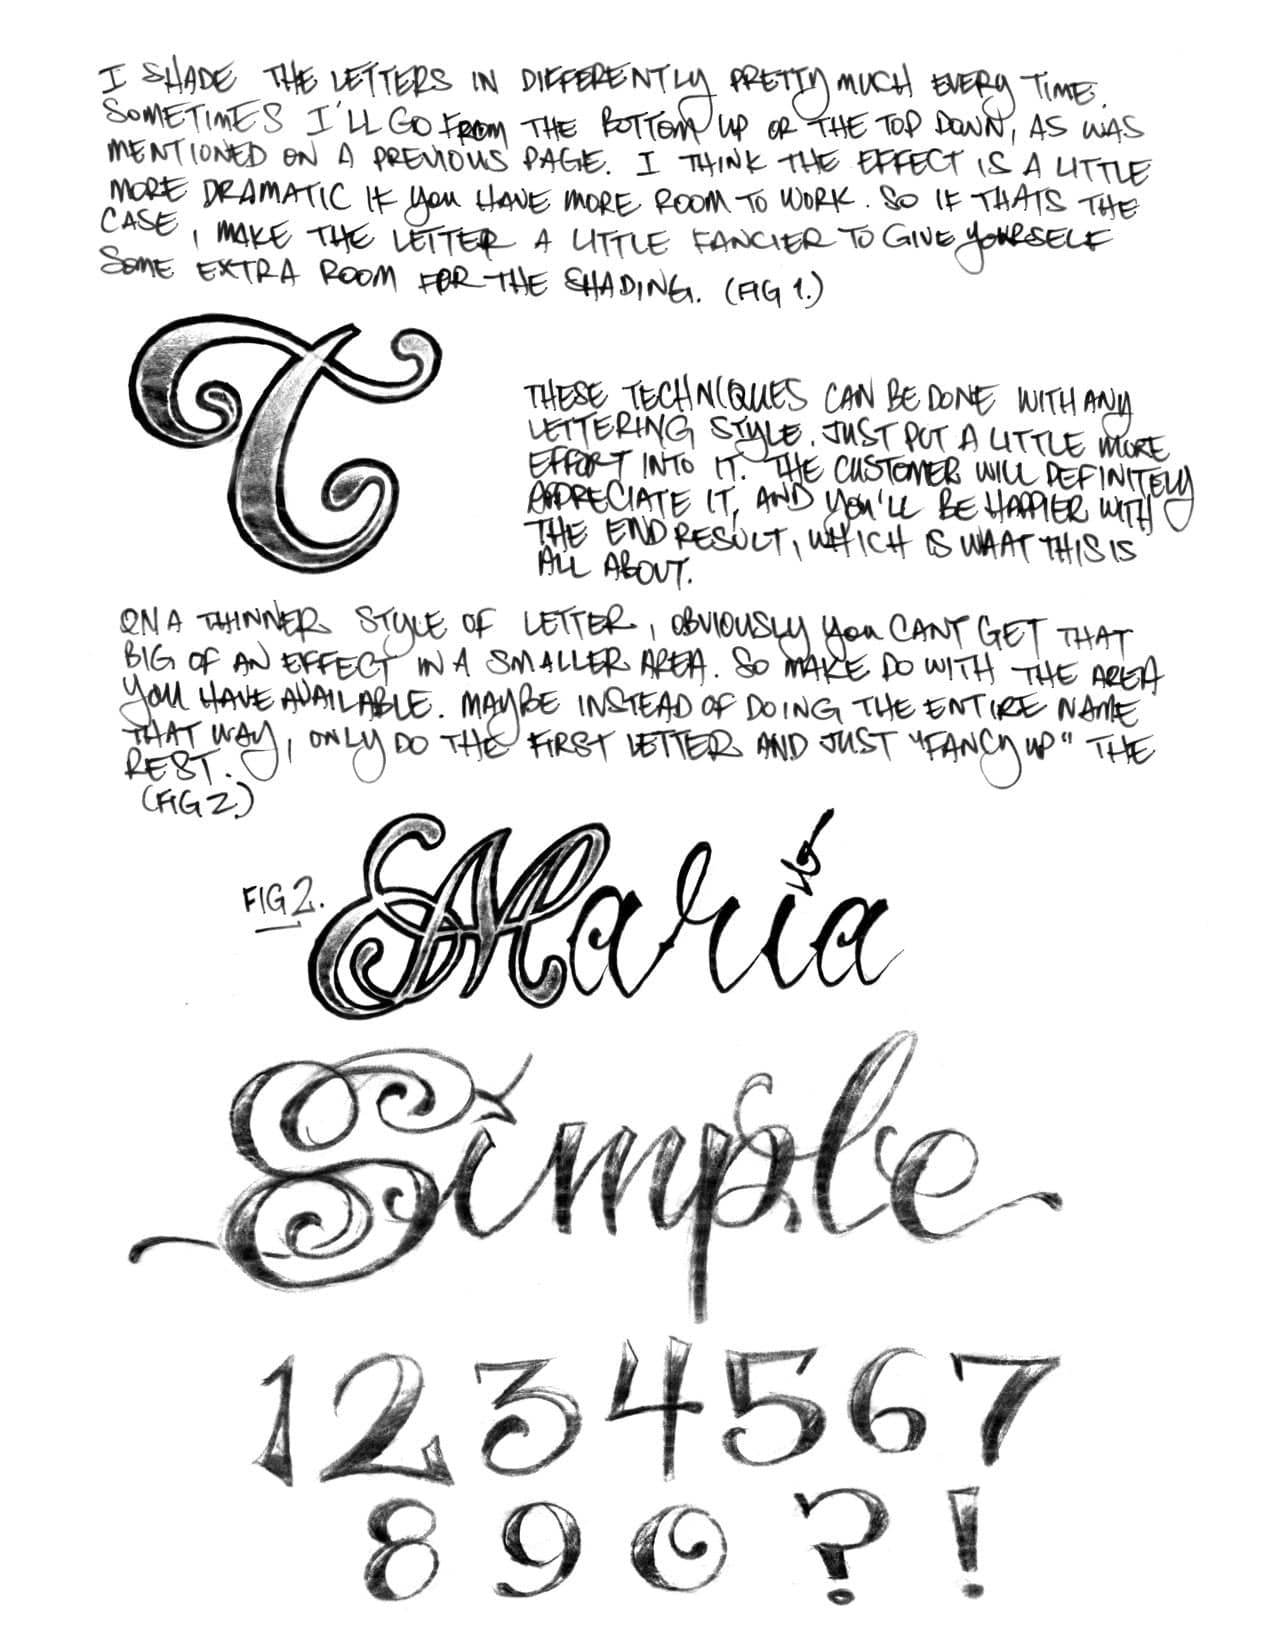 bj betts ebook lettering guides 1 3 32798434623671